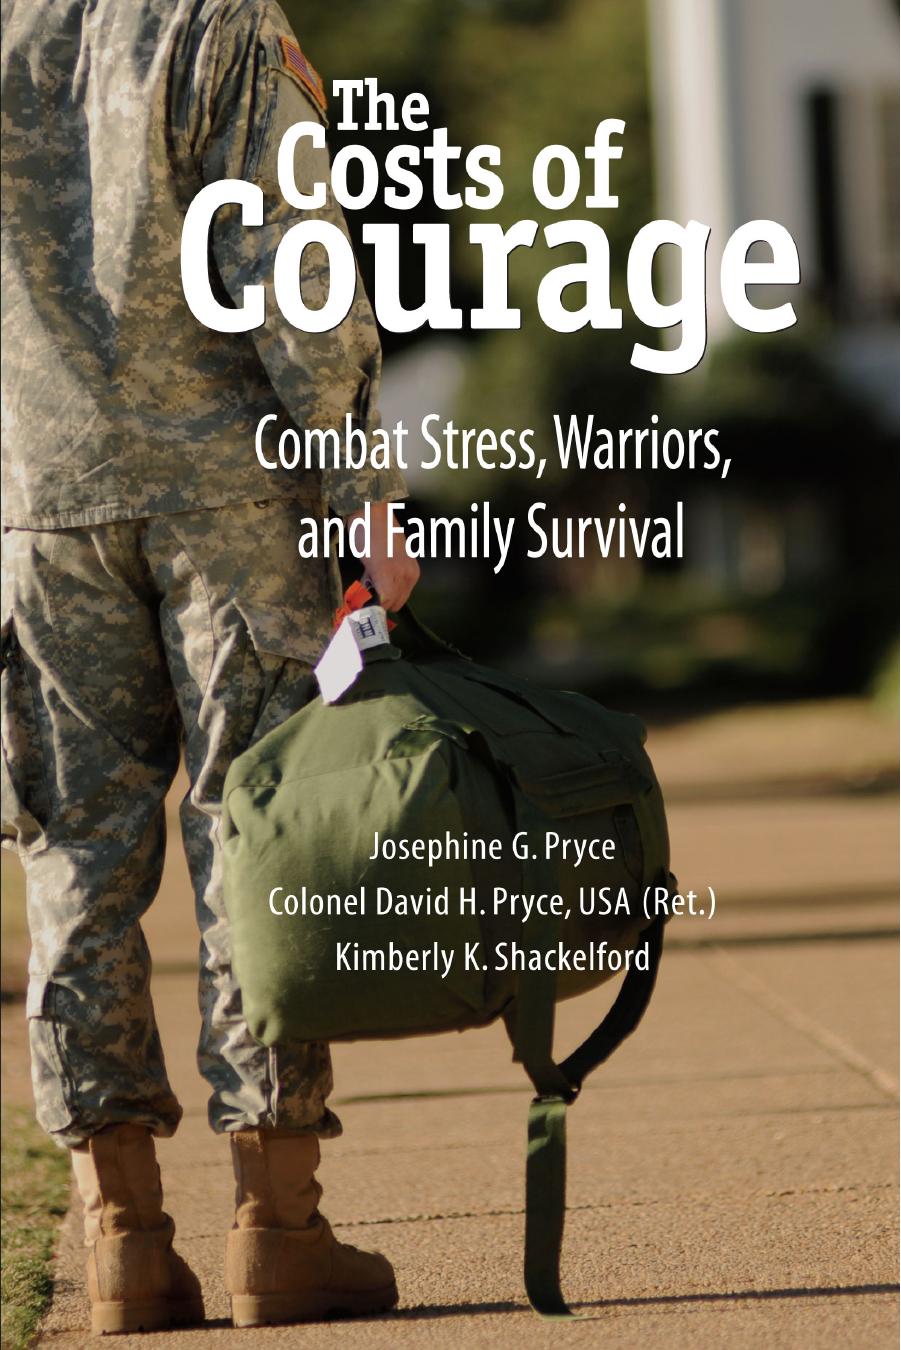 The Costs of Courage : Combat Stress, Warriors, and Family Survival by Josephine G. Pryce; David H. Pryce; Kimberly K. Shackelford